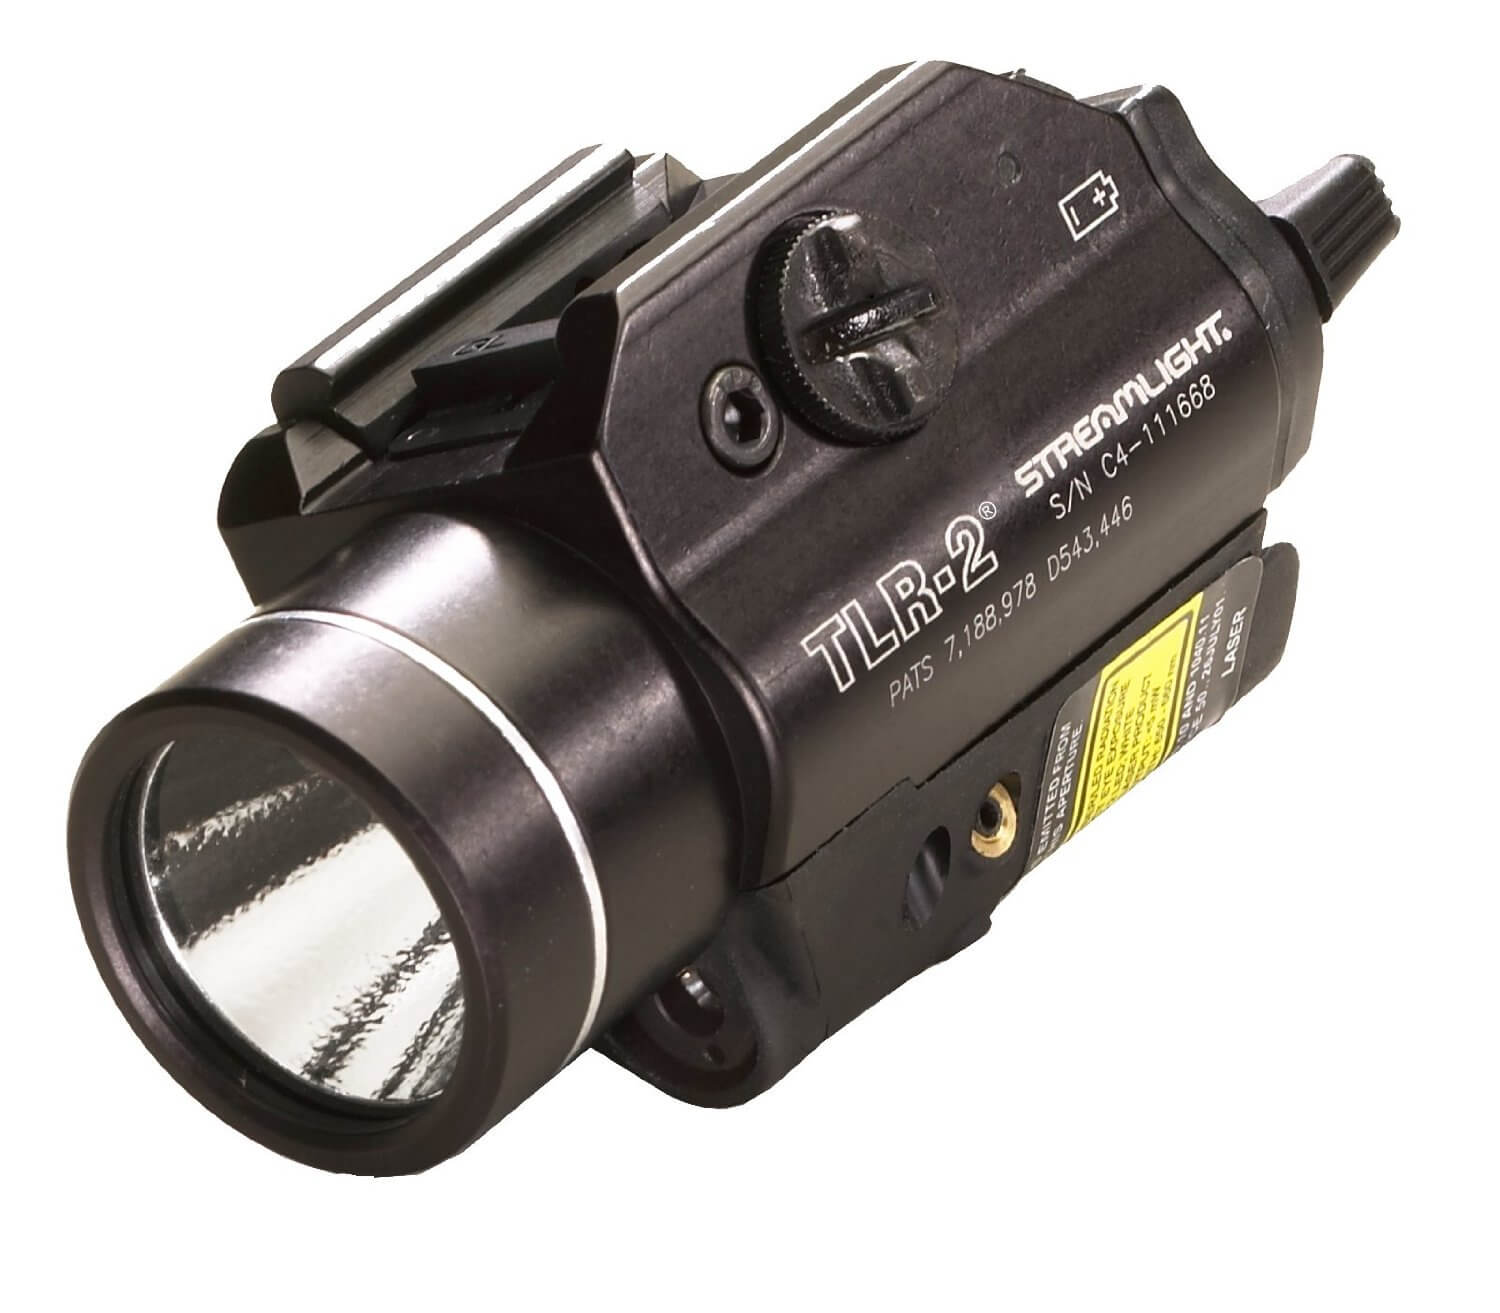 Streamlight 69240 TLR-4 Compact Rail Mounted Tactical Light with Laser Sight